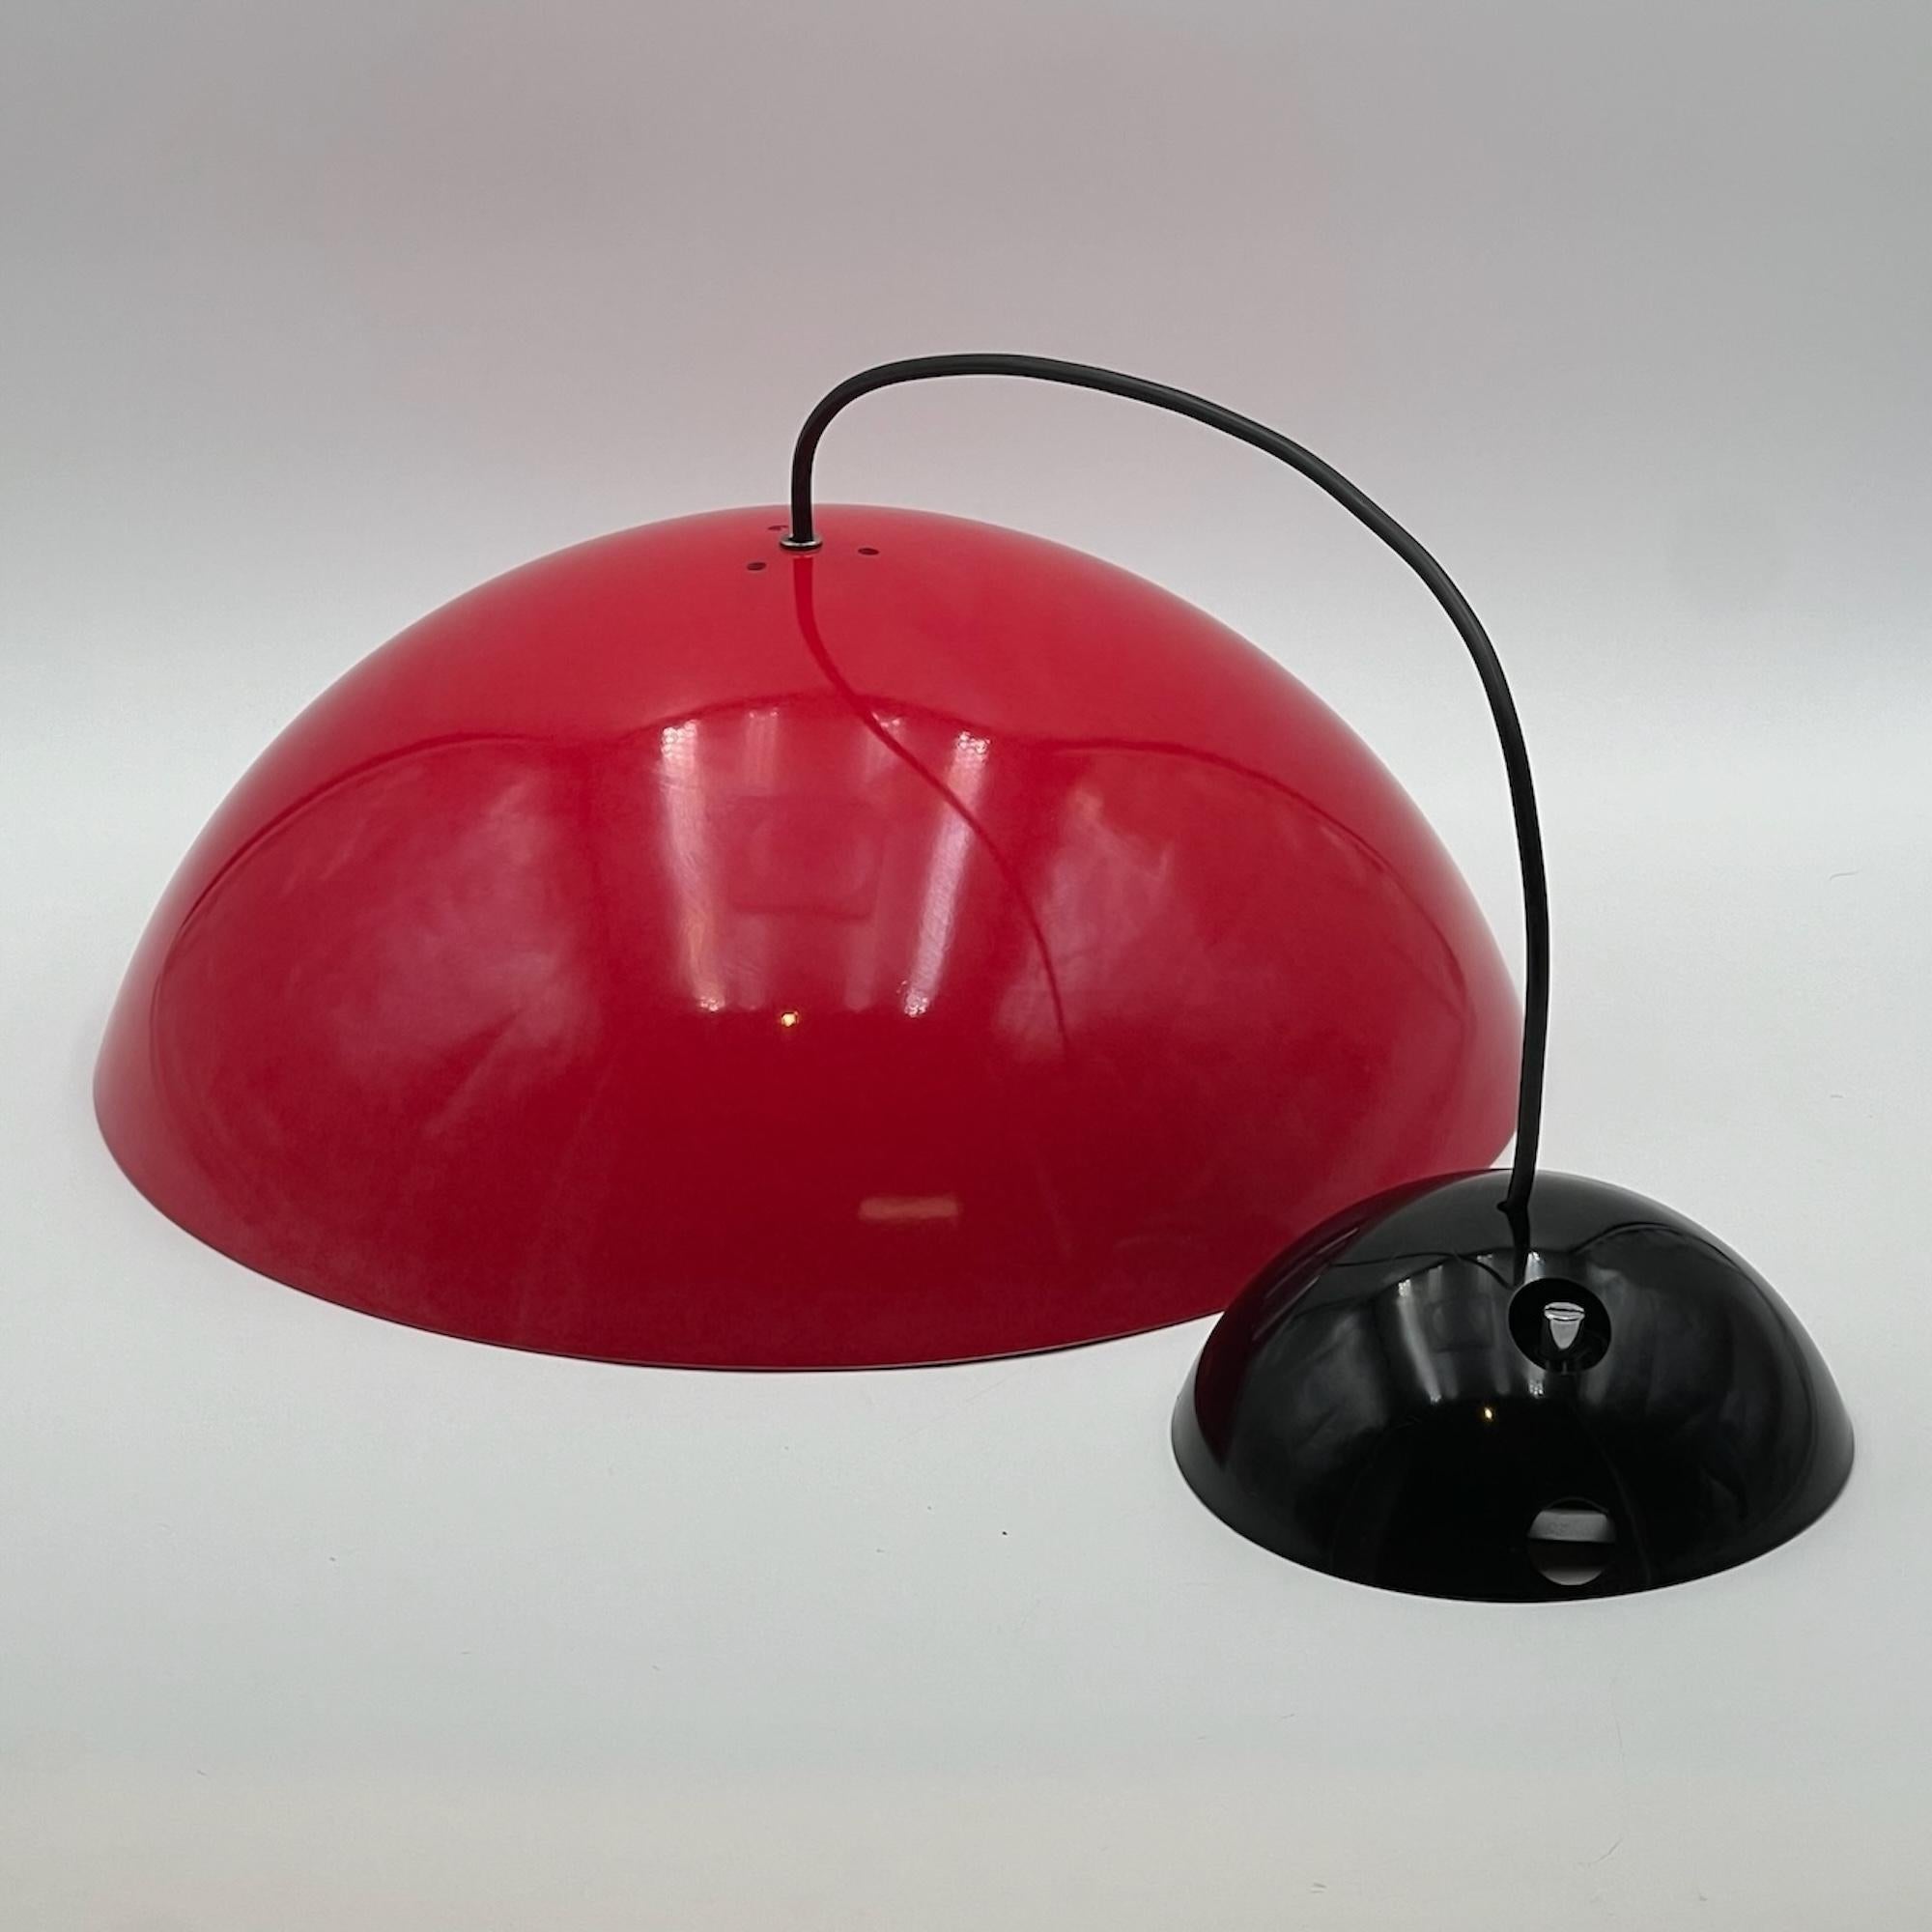 Embark on a journey through vintage design with the 'Coupe' Big Hanging Lamp by Elio Martinelli, a true gem crafted by Martinelli Luce in Italy during the 1970s. This oversized vintage lamp boasts a distinctive rounded lampshade in glossy red ABS,